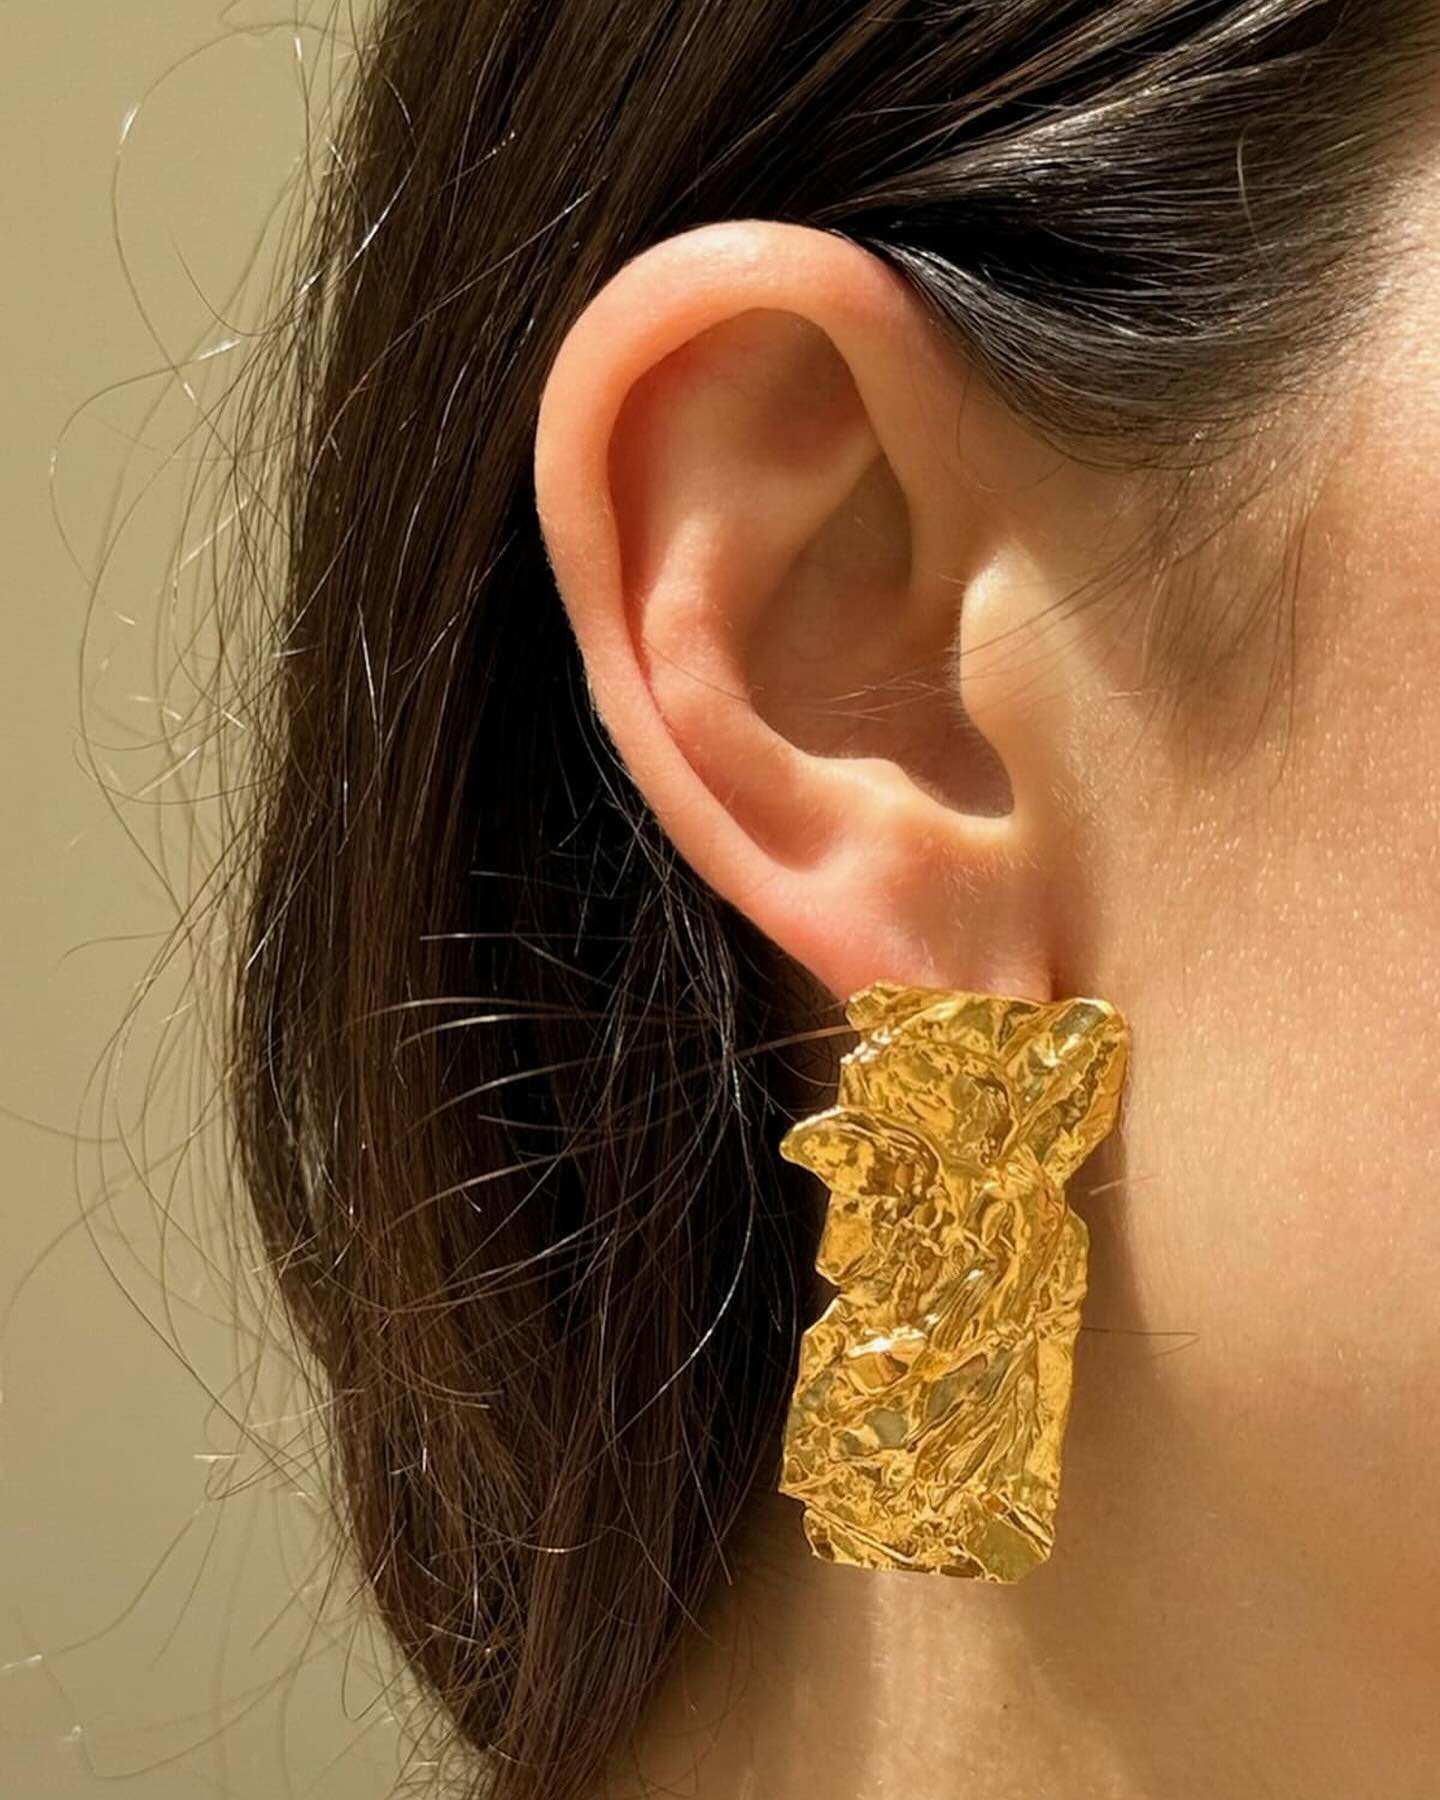 Make a statement with the Nike Foil Earrings from Hermina ✨ They feature the Greek goddess of Victory who personifies excellence in the arts, music and athletics. Available online + in store now